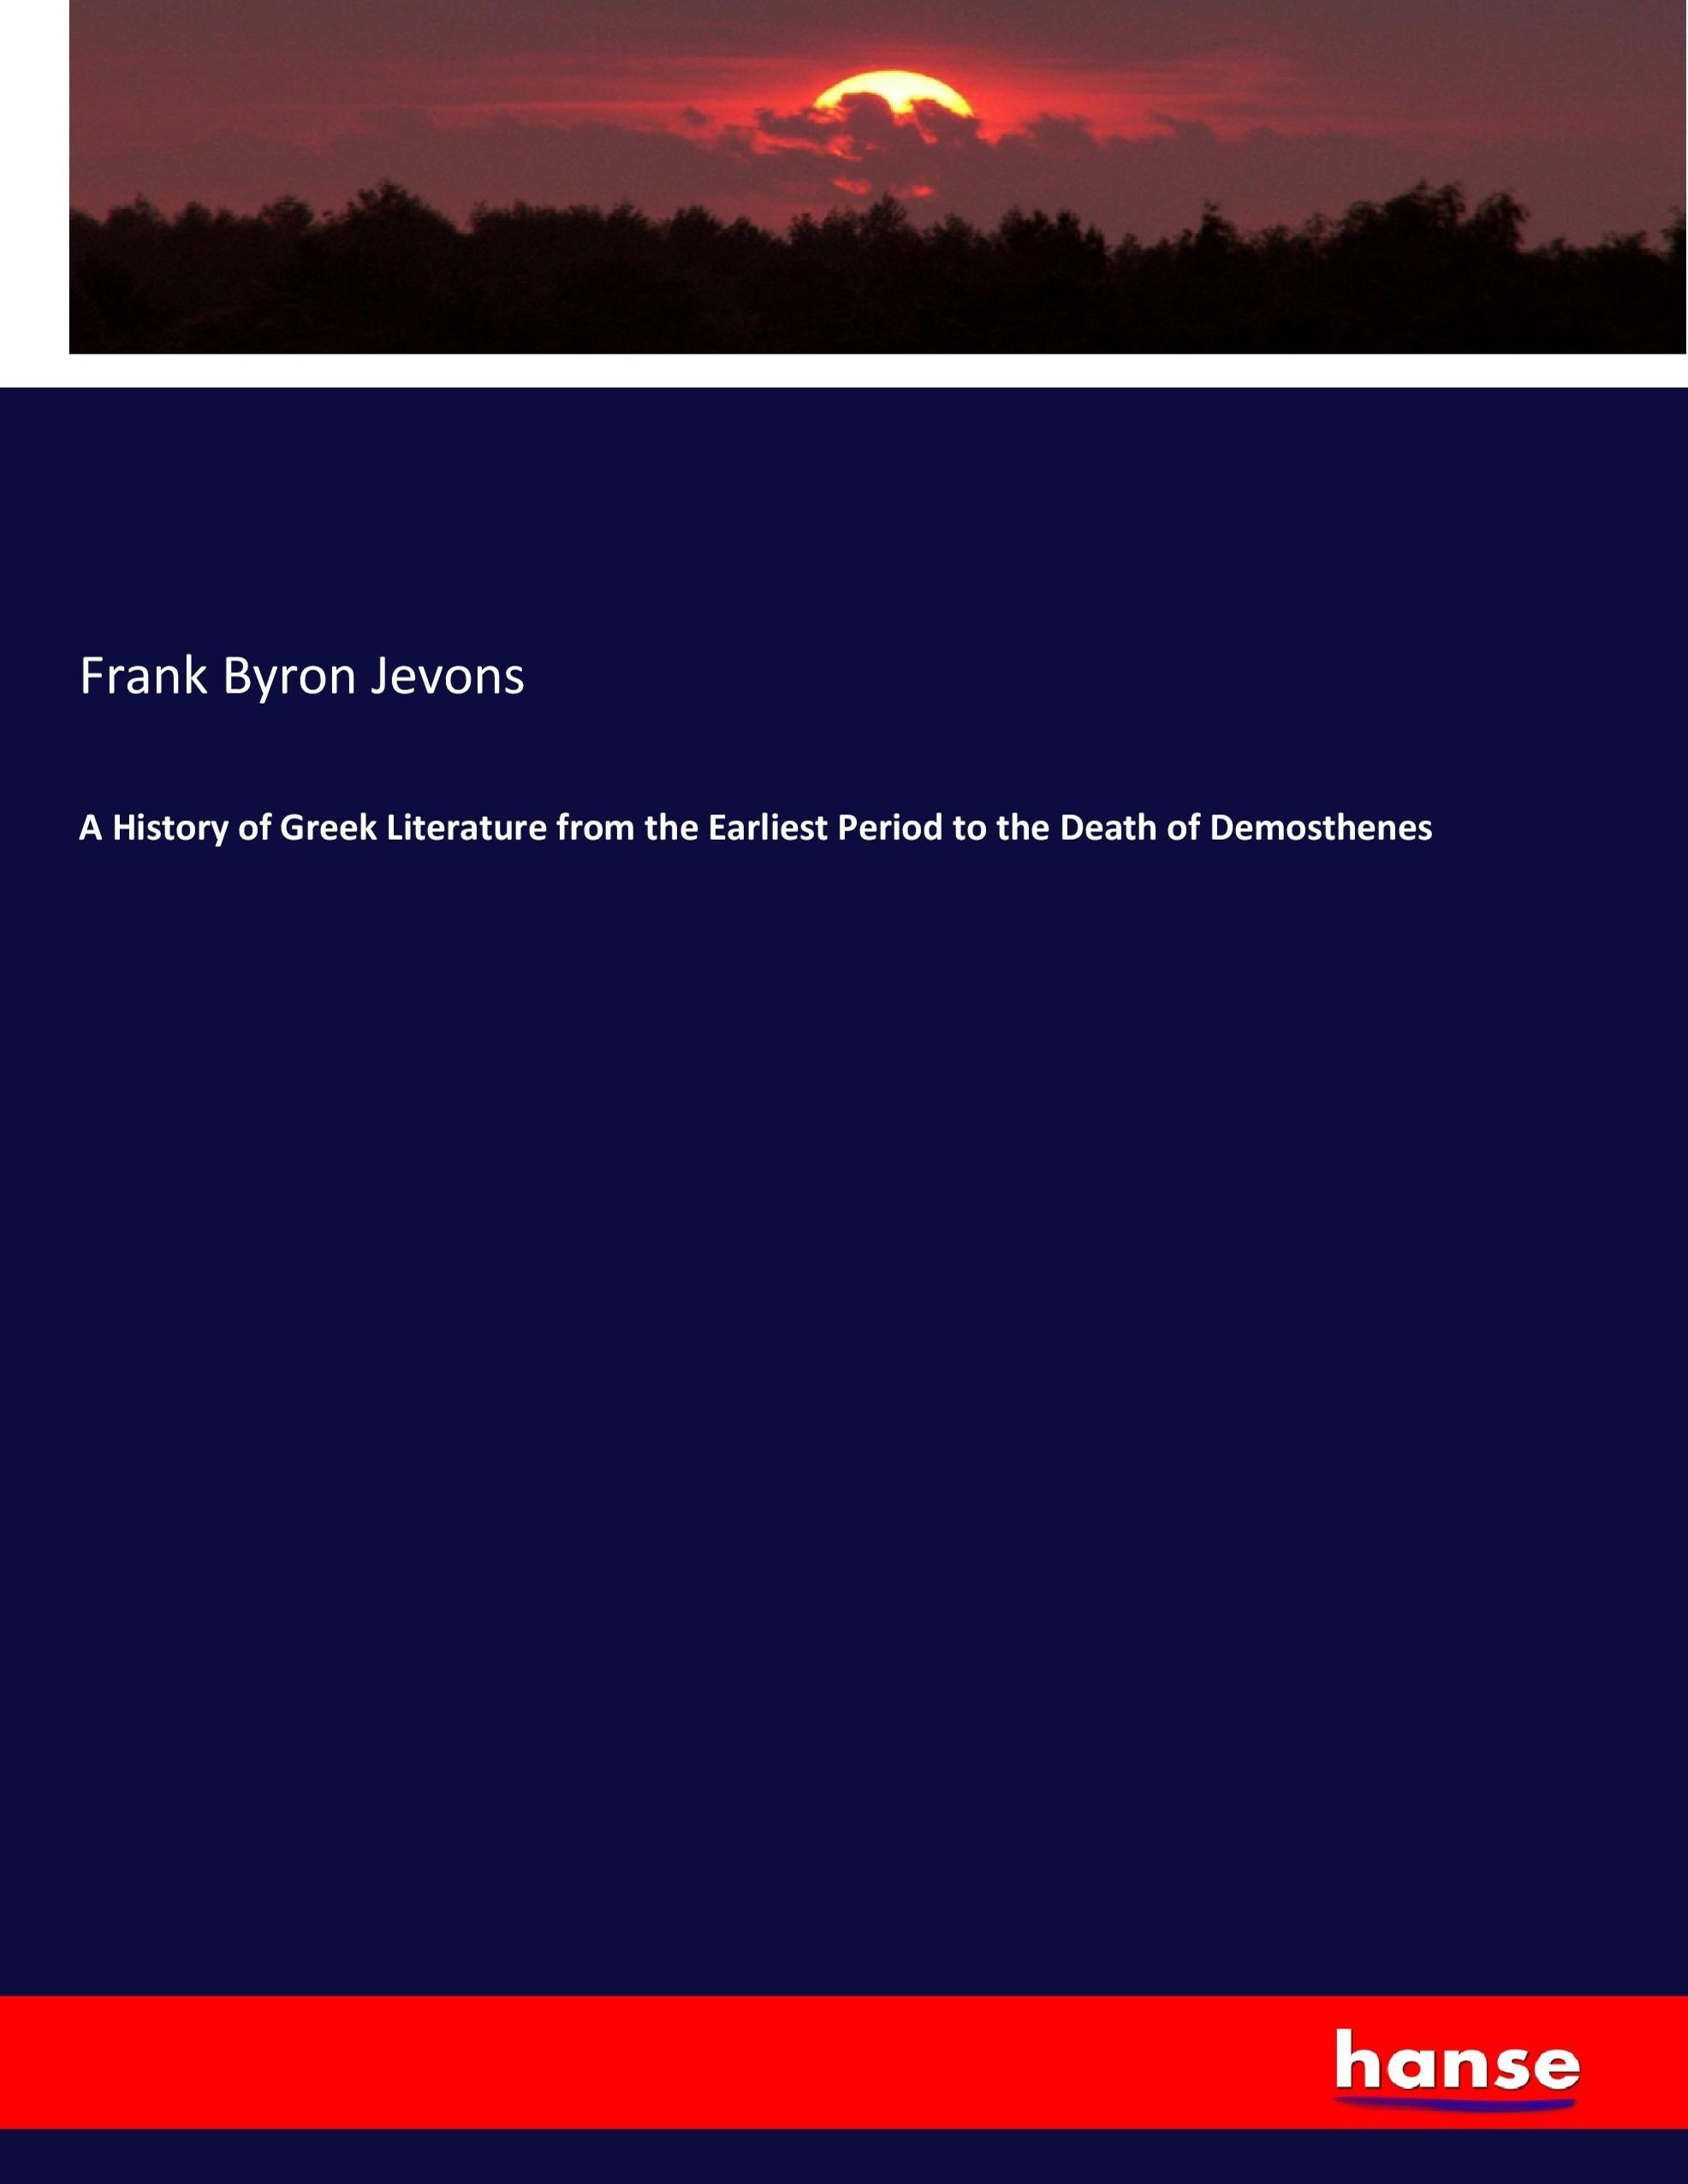 A History of Greek Literature from the Earliest Period to the Death of Demosthenes - Jevons, Frank B.